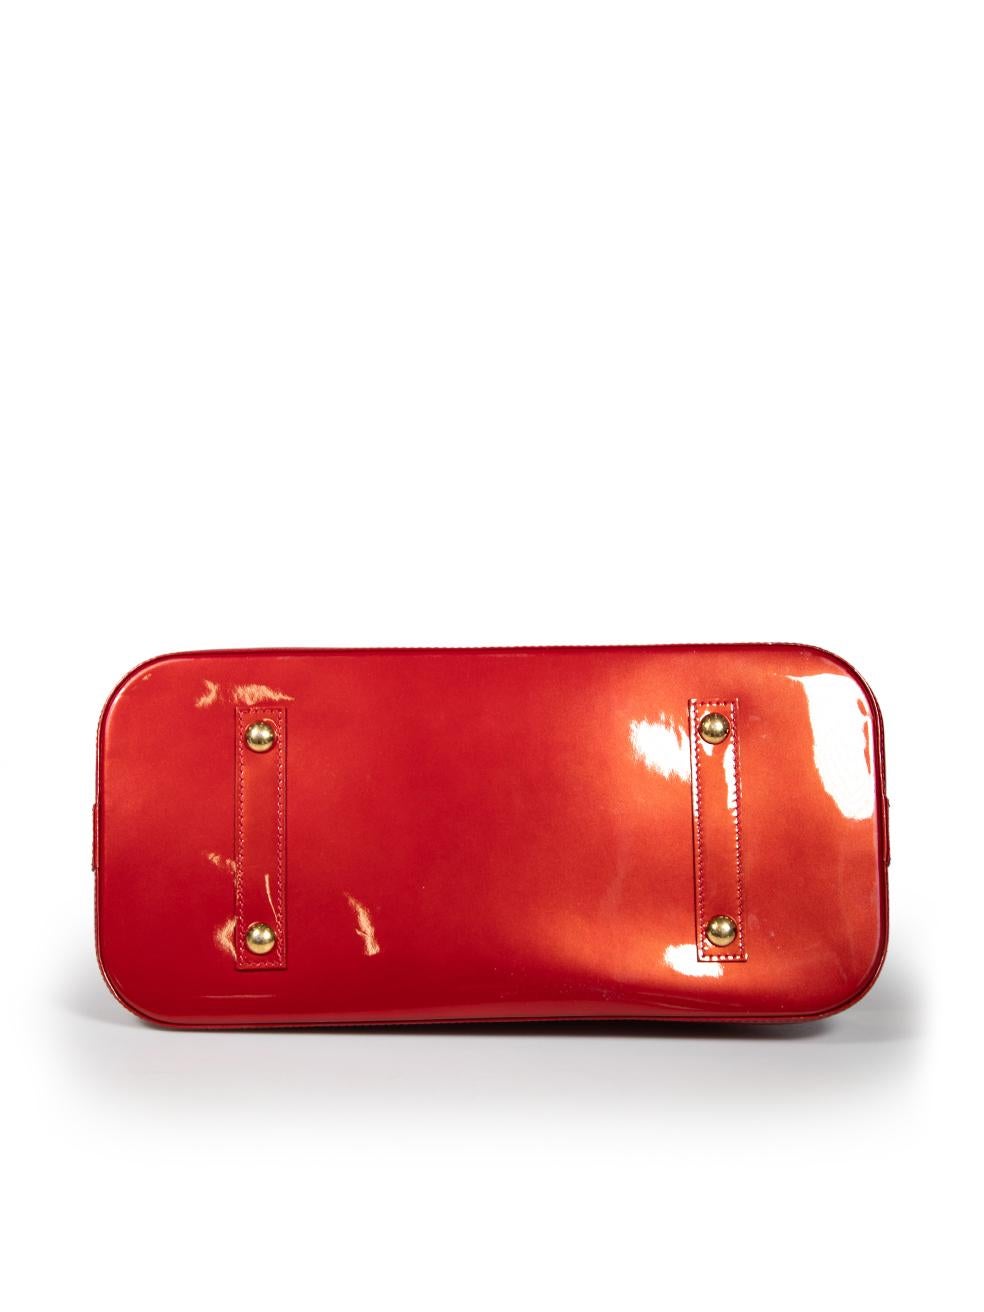 Women's Louis Vuitton 2013 Red Patent Leather Vernis Alma GM